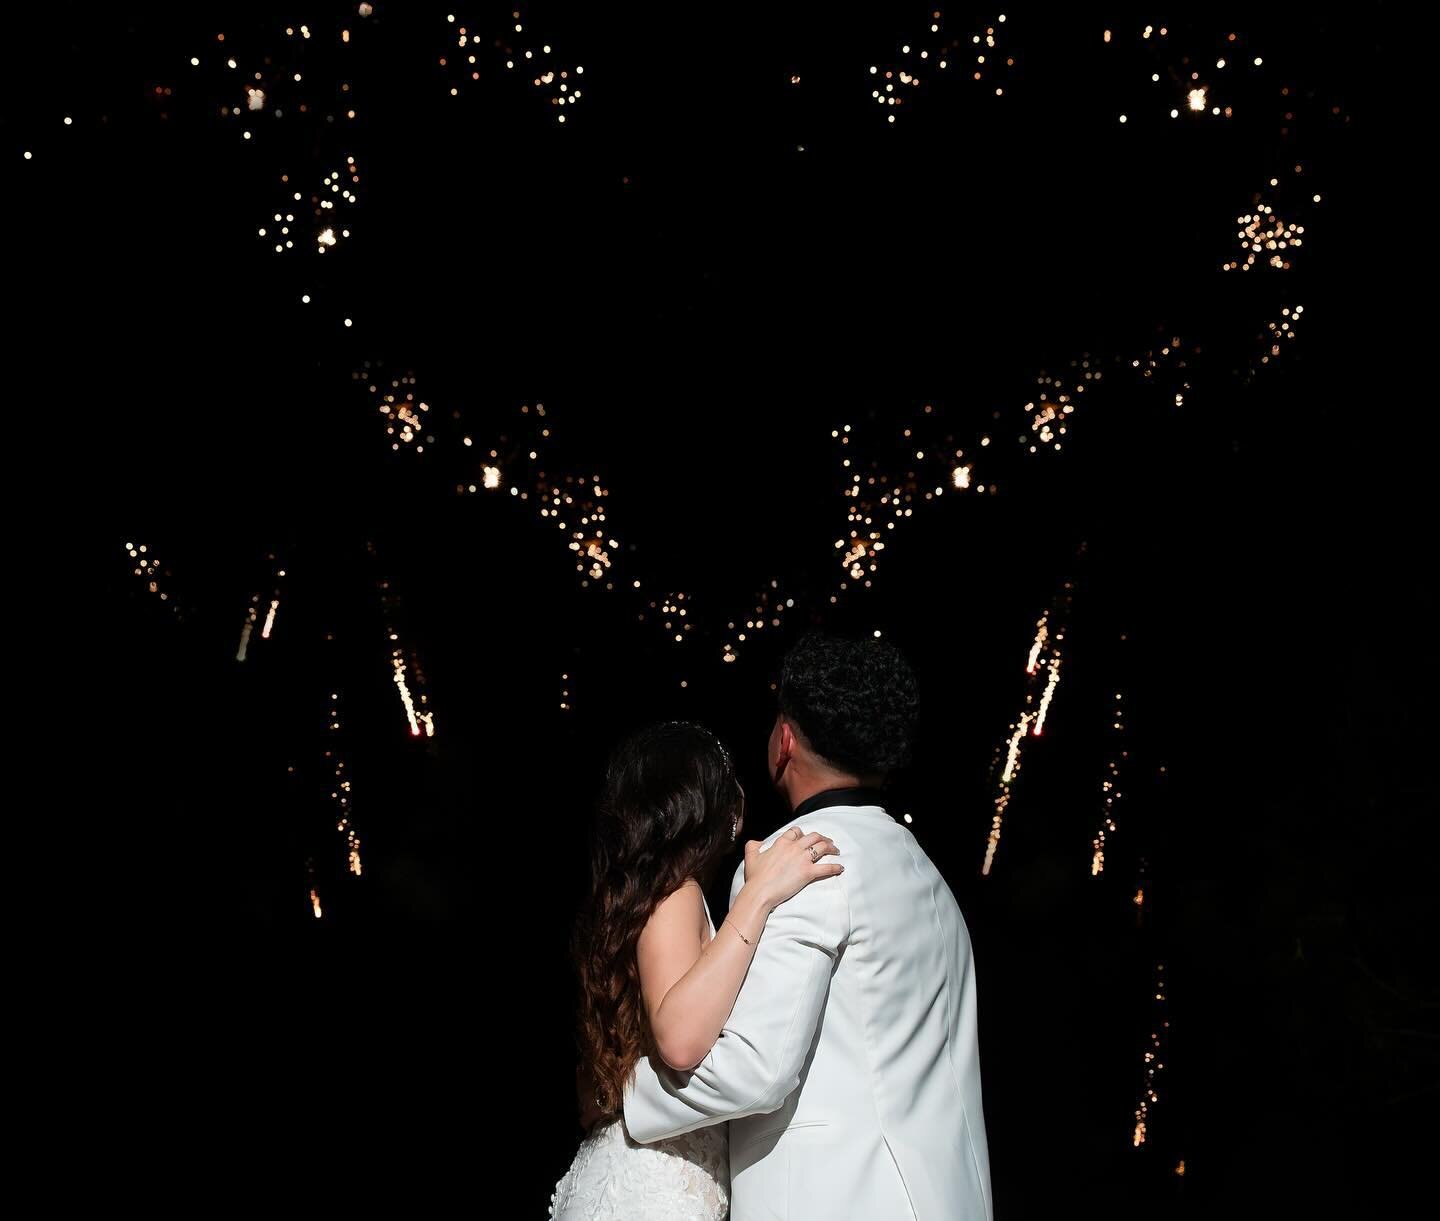 ✨Happy New Years to Everyone✨

This year was great, but here&rsquo;s to an even better 2024 🥂

Excited to meet all our new couples getting married this year! 🥳

#rgvphotographer #sony #rgvweddings #rgvsmallbusiness #rgvphotography #mcallen #edinbur